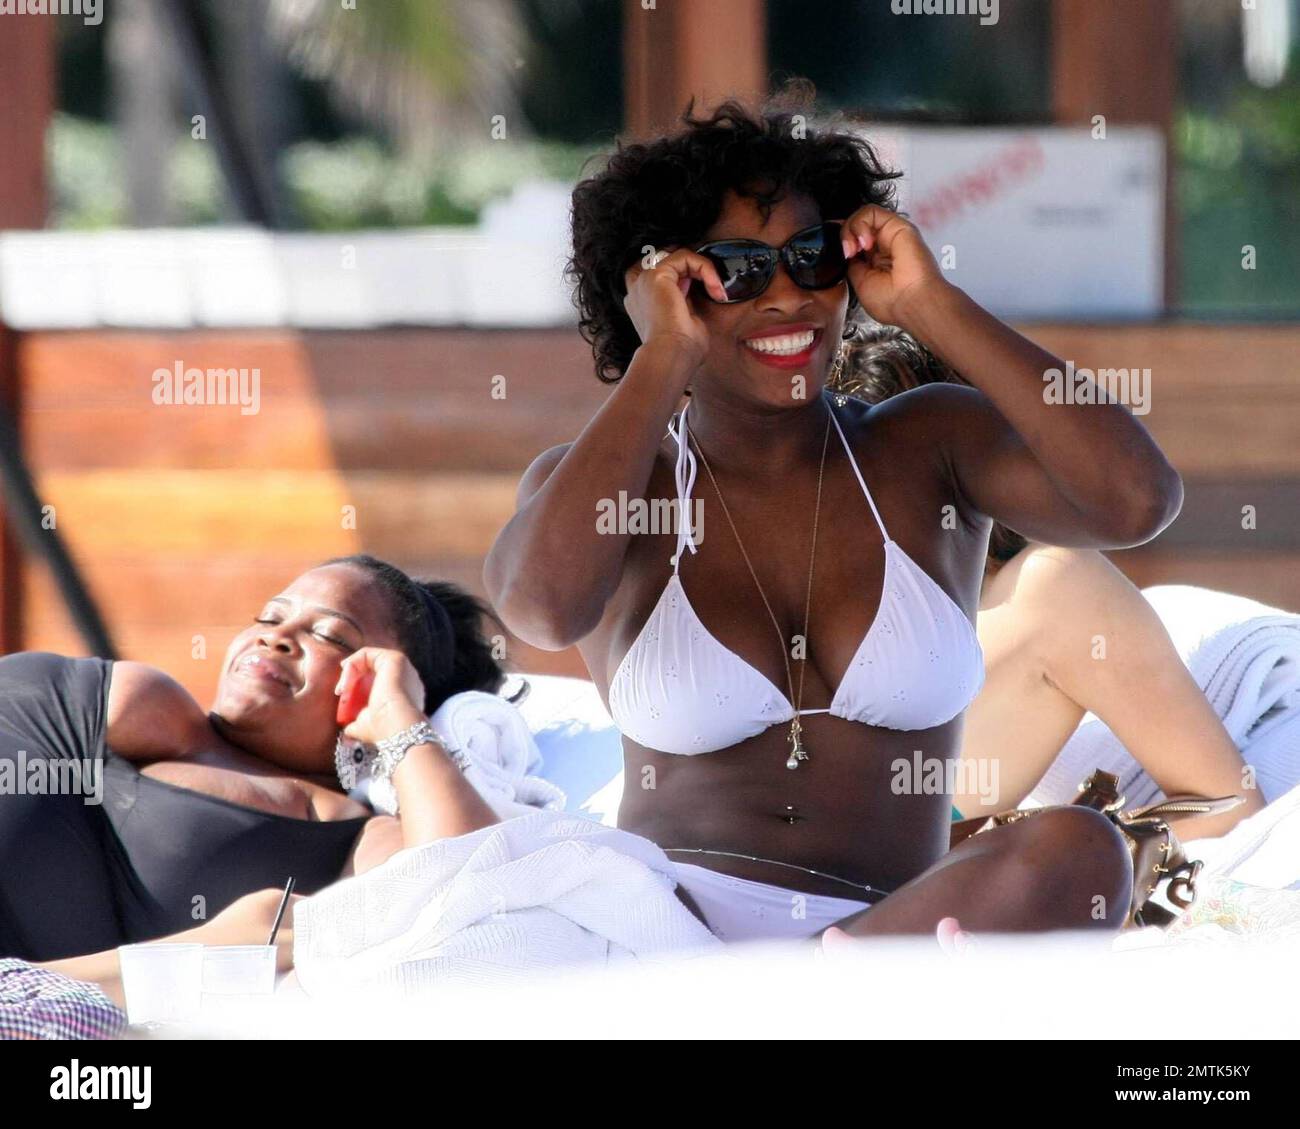 Serena Williams doesn't seem concerned about losing her WTA No. 1 ranking  as she donned a bikini to catch some rays with BFF Kelly Rowland and some  other friends on South Beach.